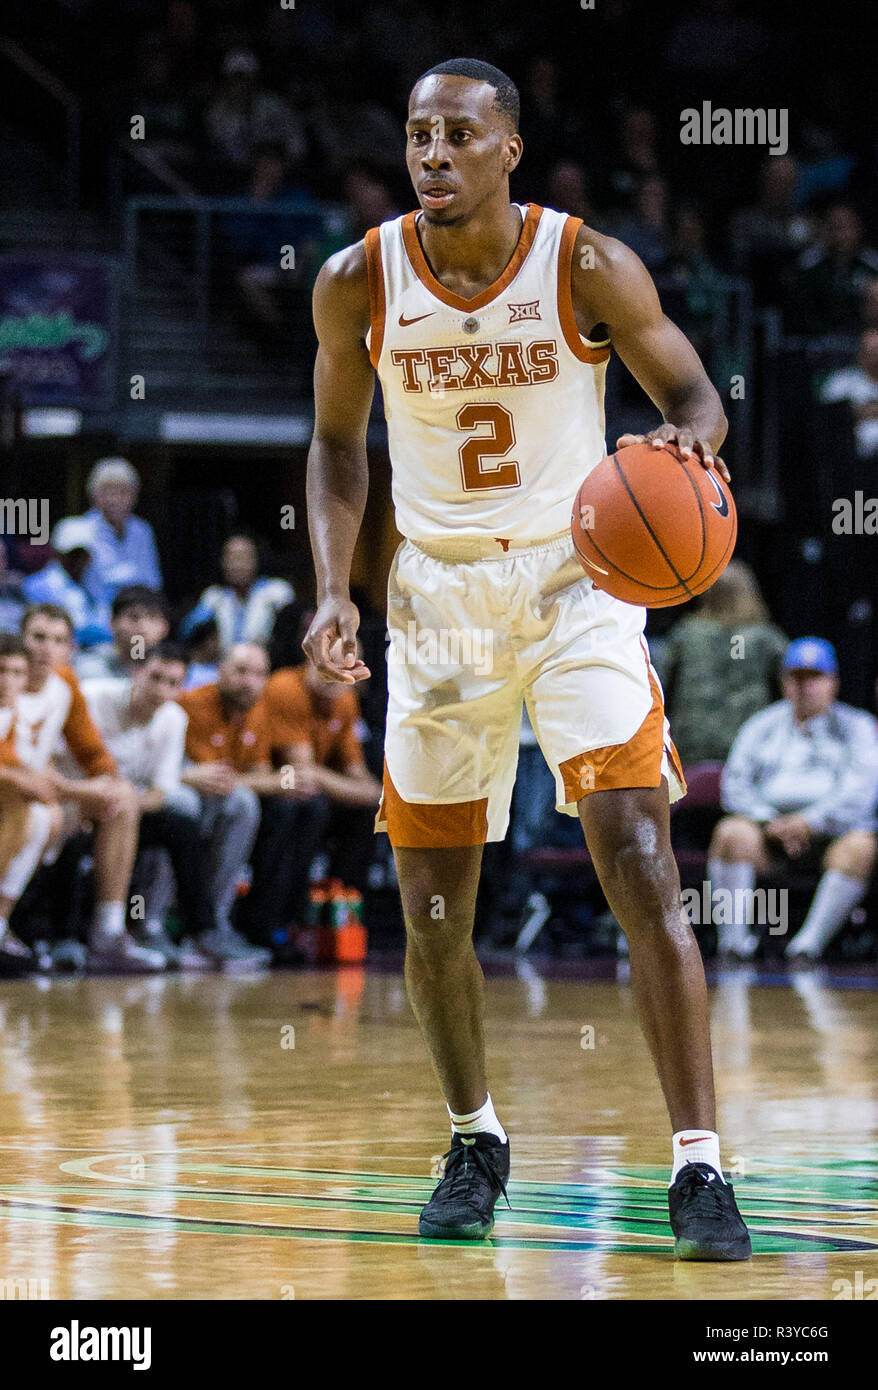 Nov 23 2018 Las Vegas, NV U.S.A. Texas guard Matt Coleman III (2) brings the ball up court during the NCAA Men's Basketball Continental Tire Las Vegas Invitational between Texas Longhorns and the Michigan State Spartans 68-78 lost at The Orleans Arena Las Vegas, NV. Thurman James/CSM Stock Photo